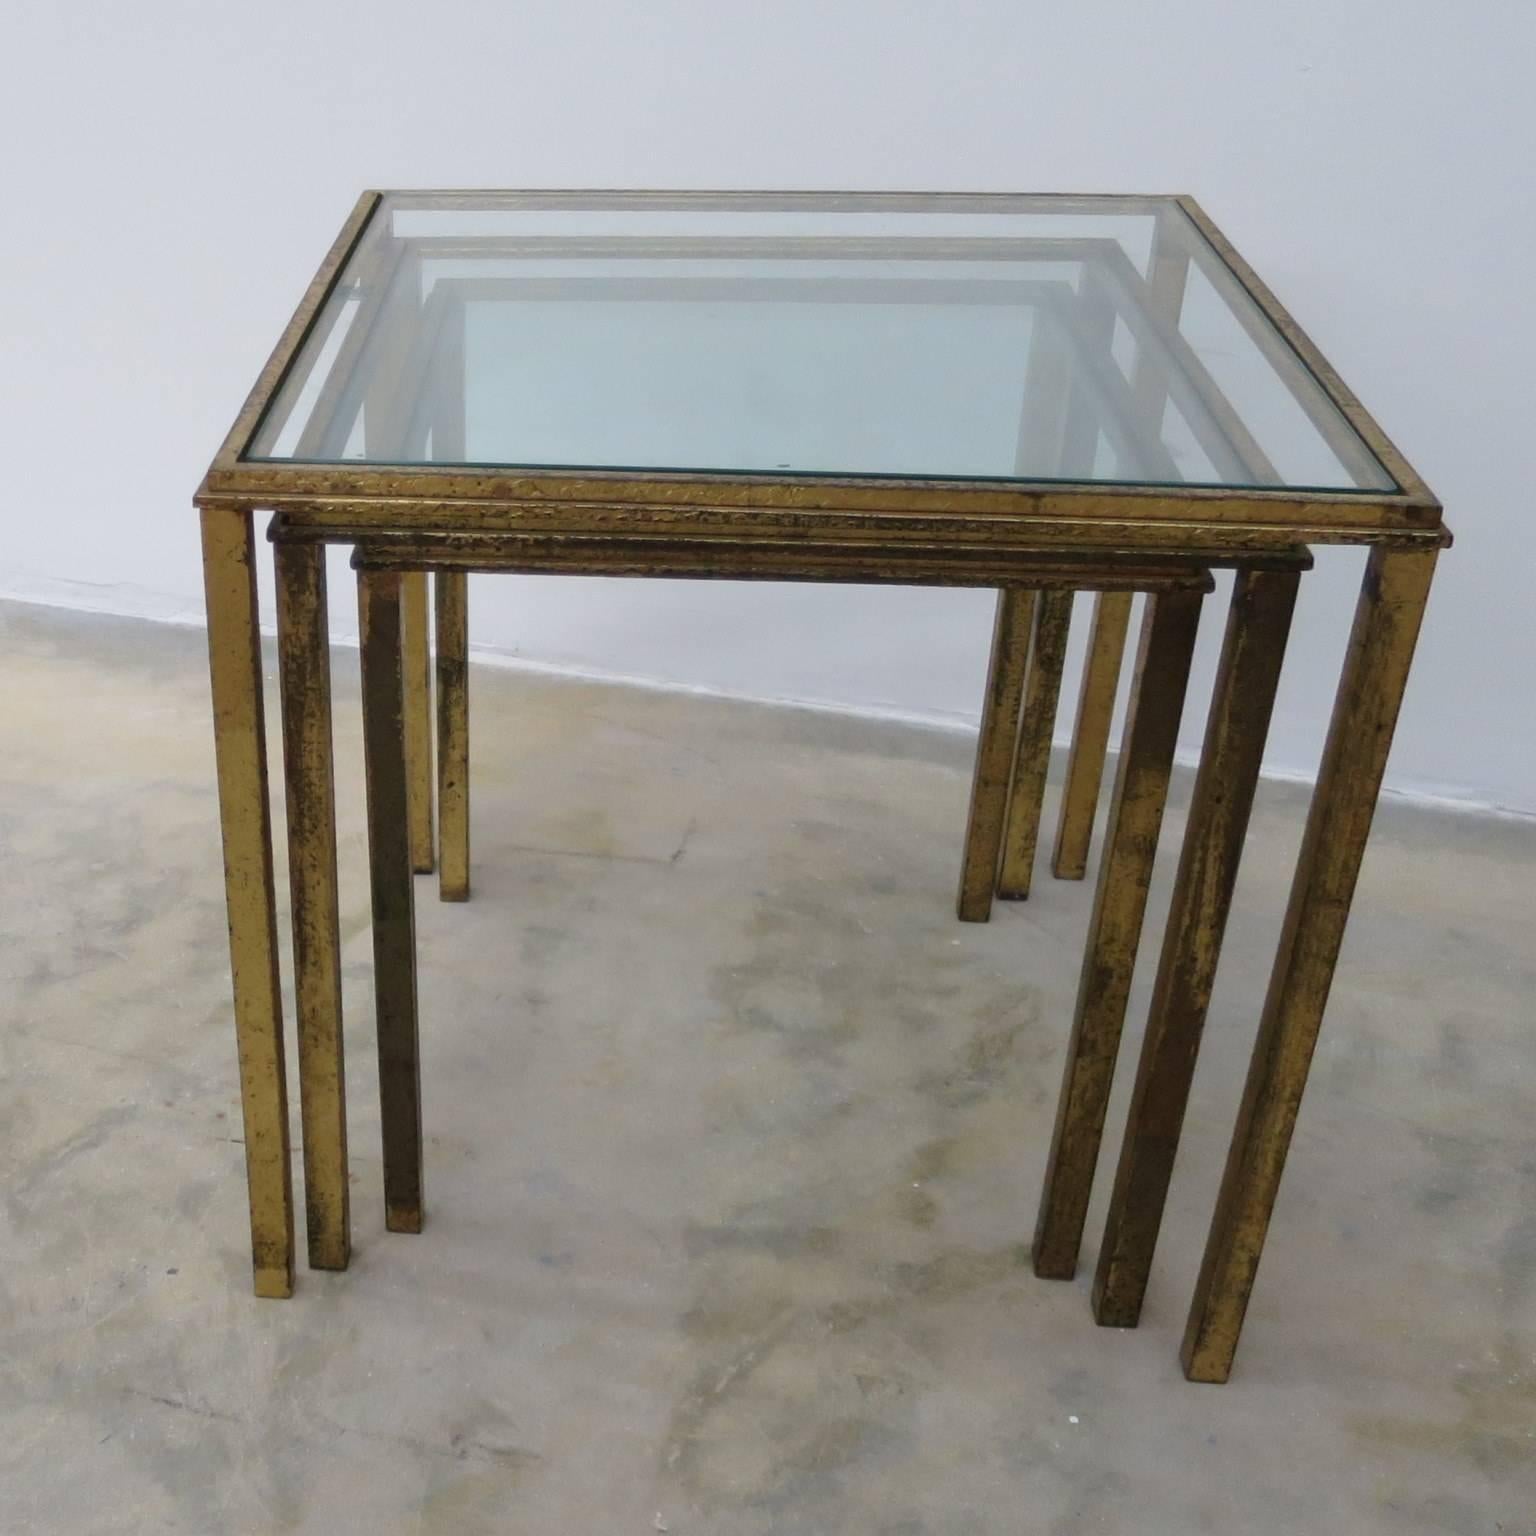 Gogeous gilded set by Roger Thibier designer .
 gilt wrought iron nesting side tables with glass top (a total of 6 items.) 2 set of 3 items .
Mid-Century Modern period.
Dimension for each one
11